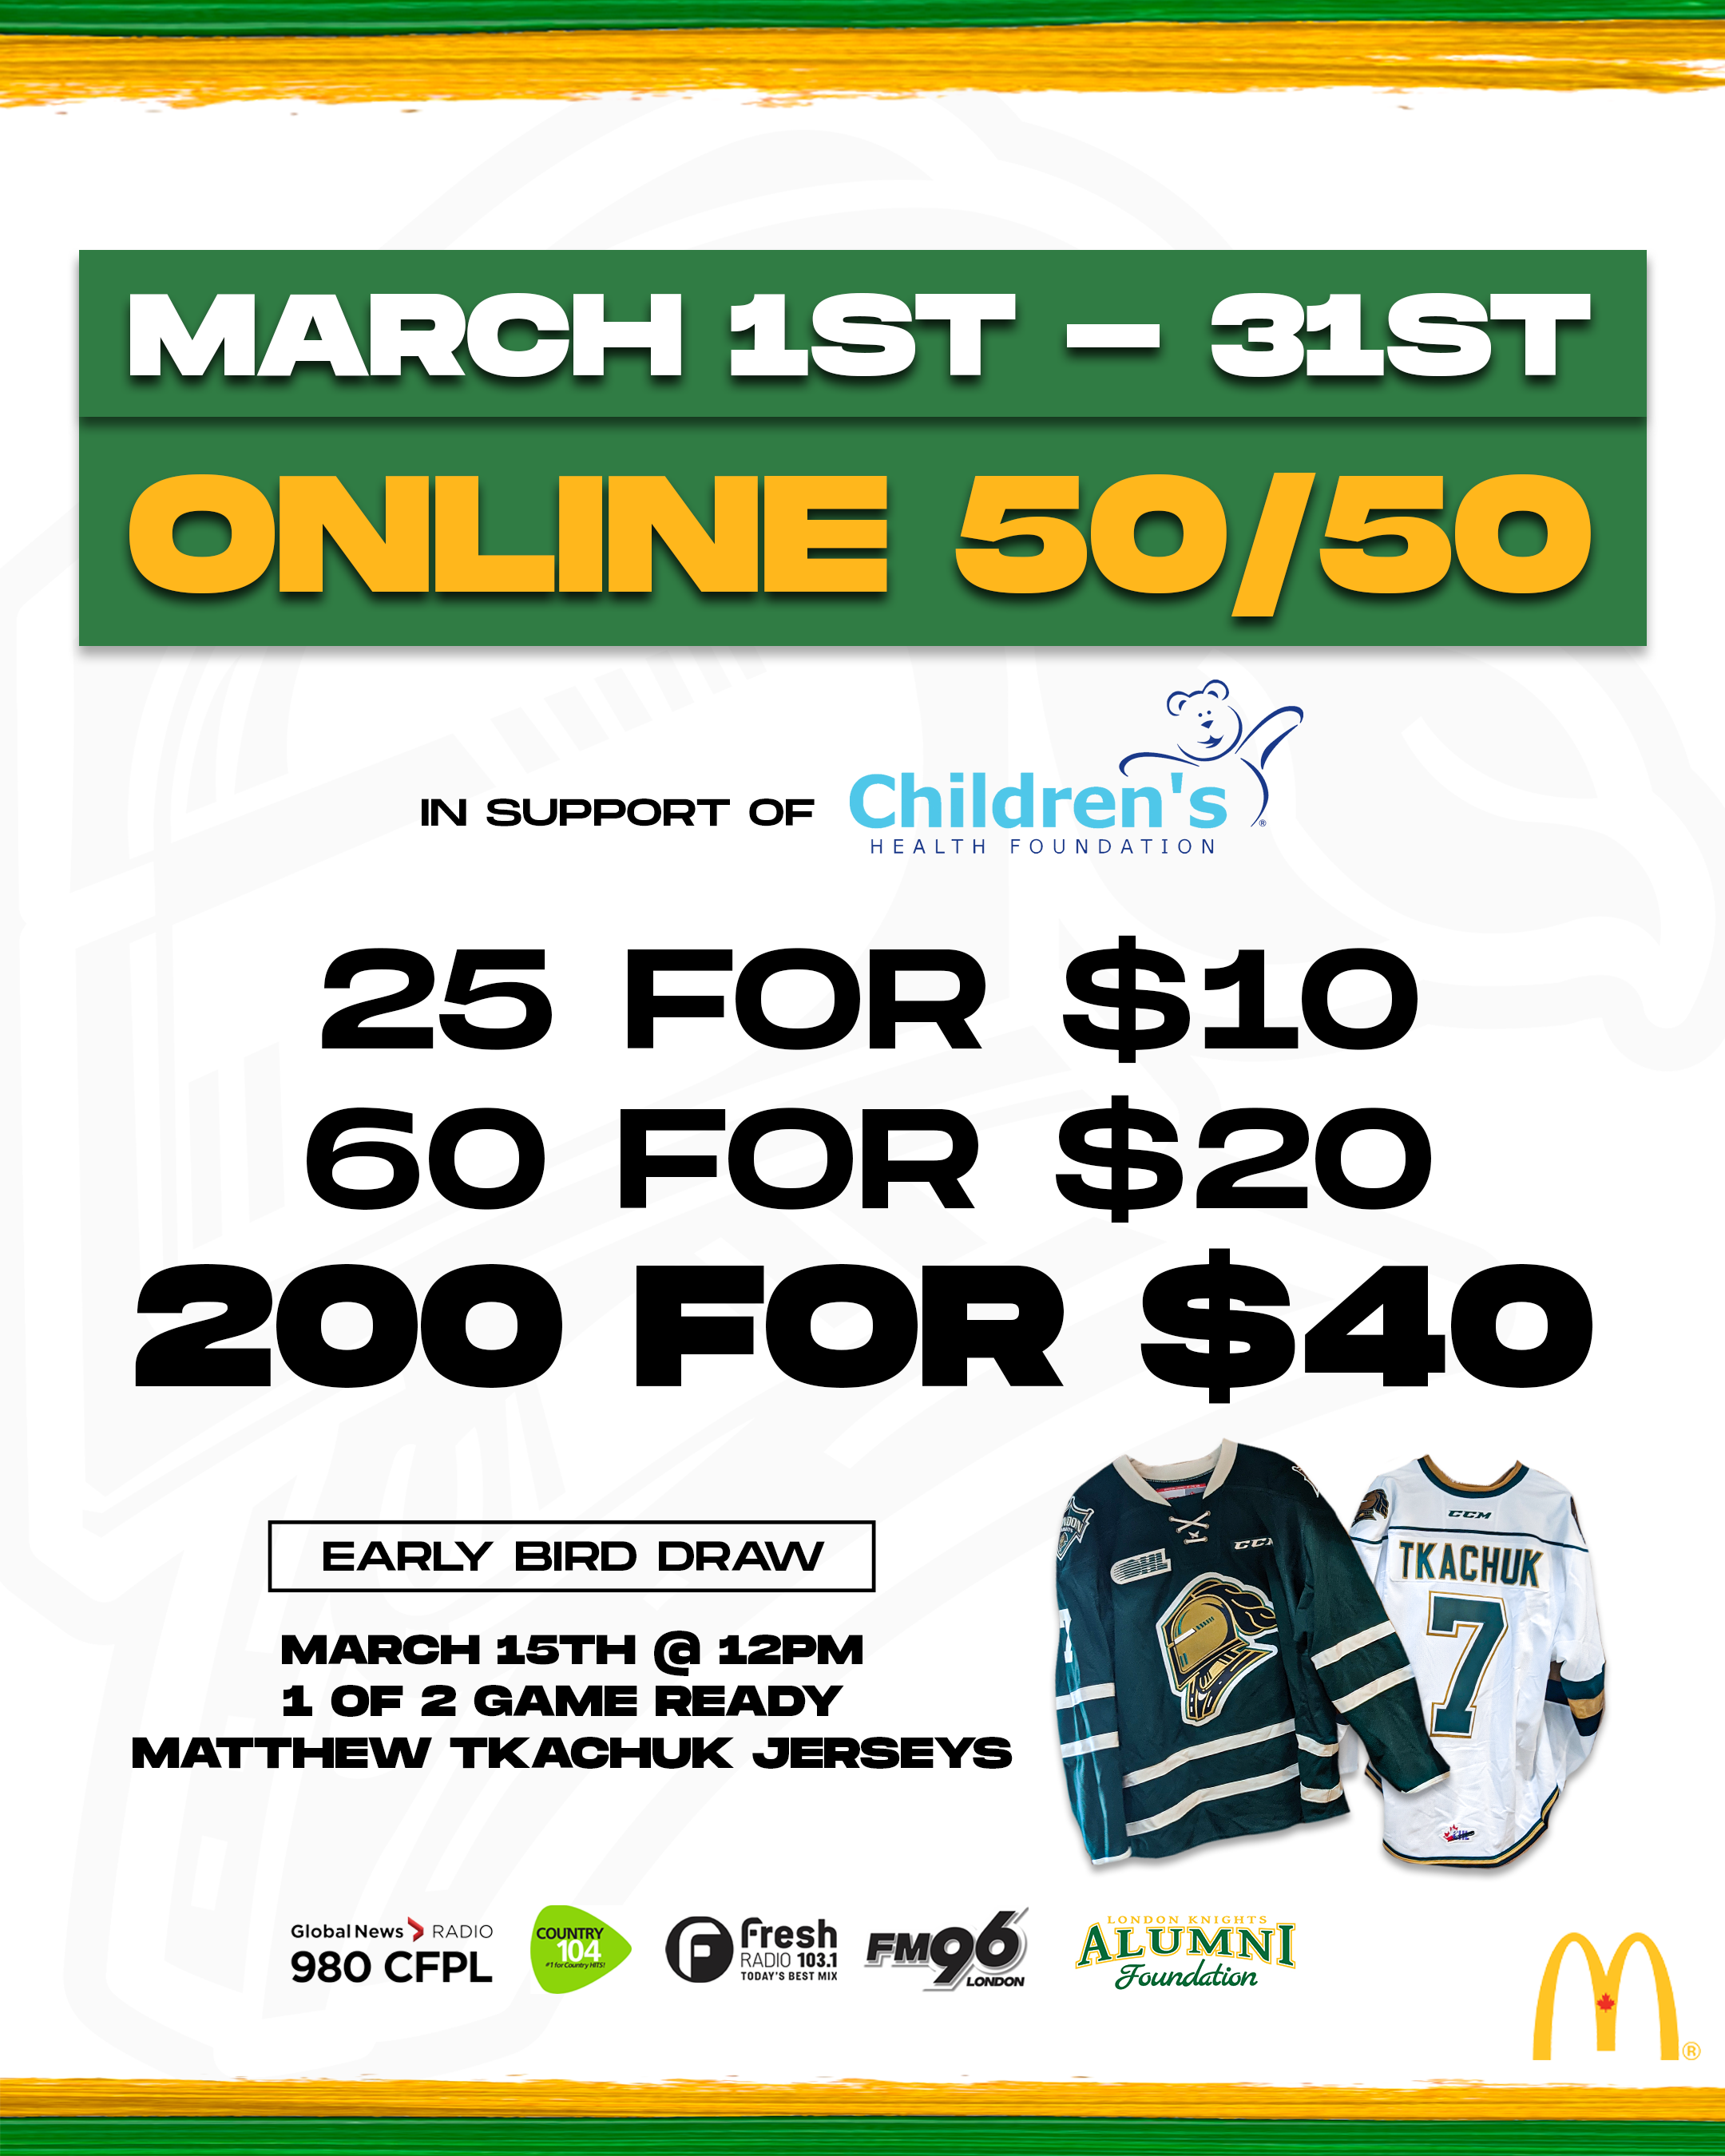 London Knights 50/50 in Support of Childrens Health Foundation Childrens Health Foundation